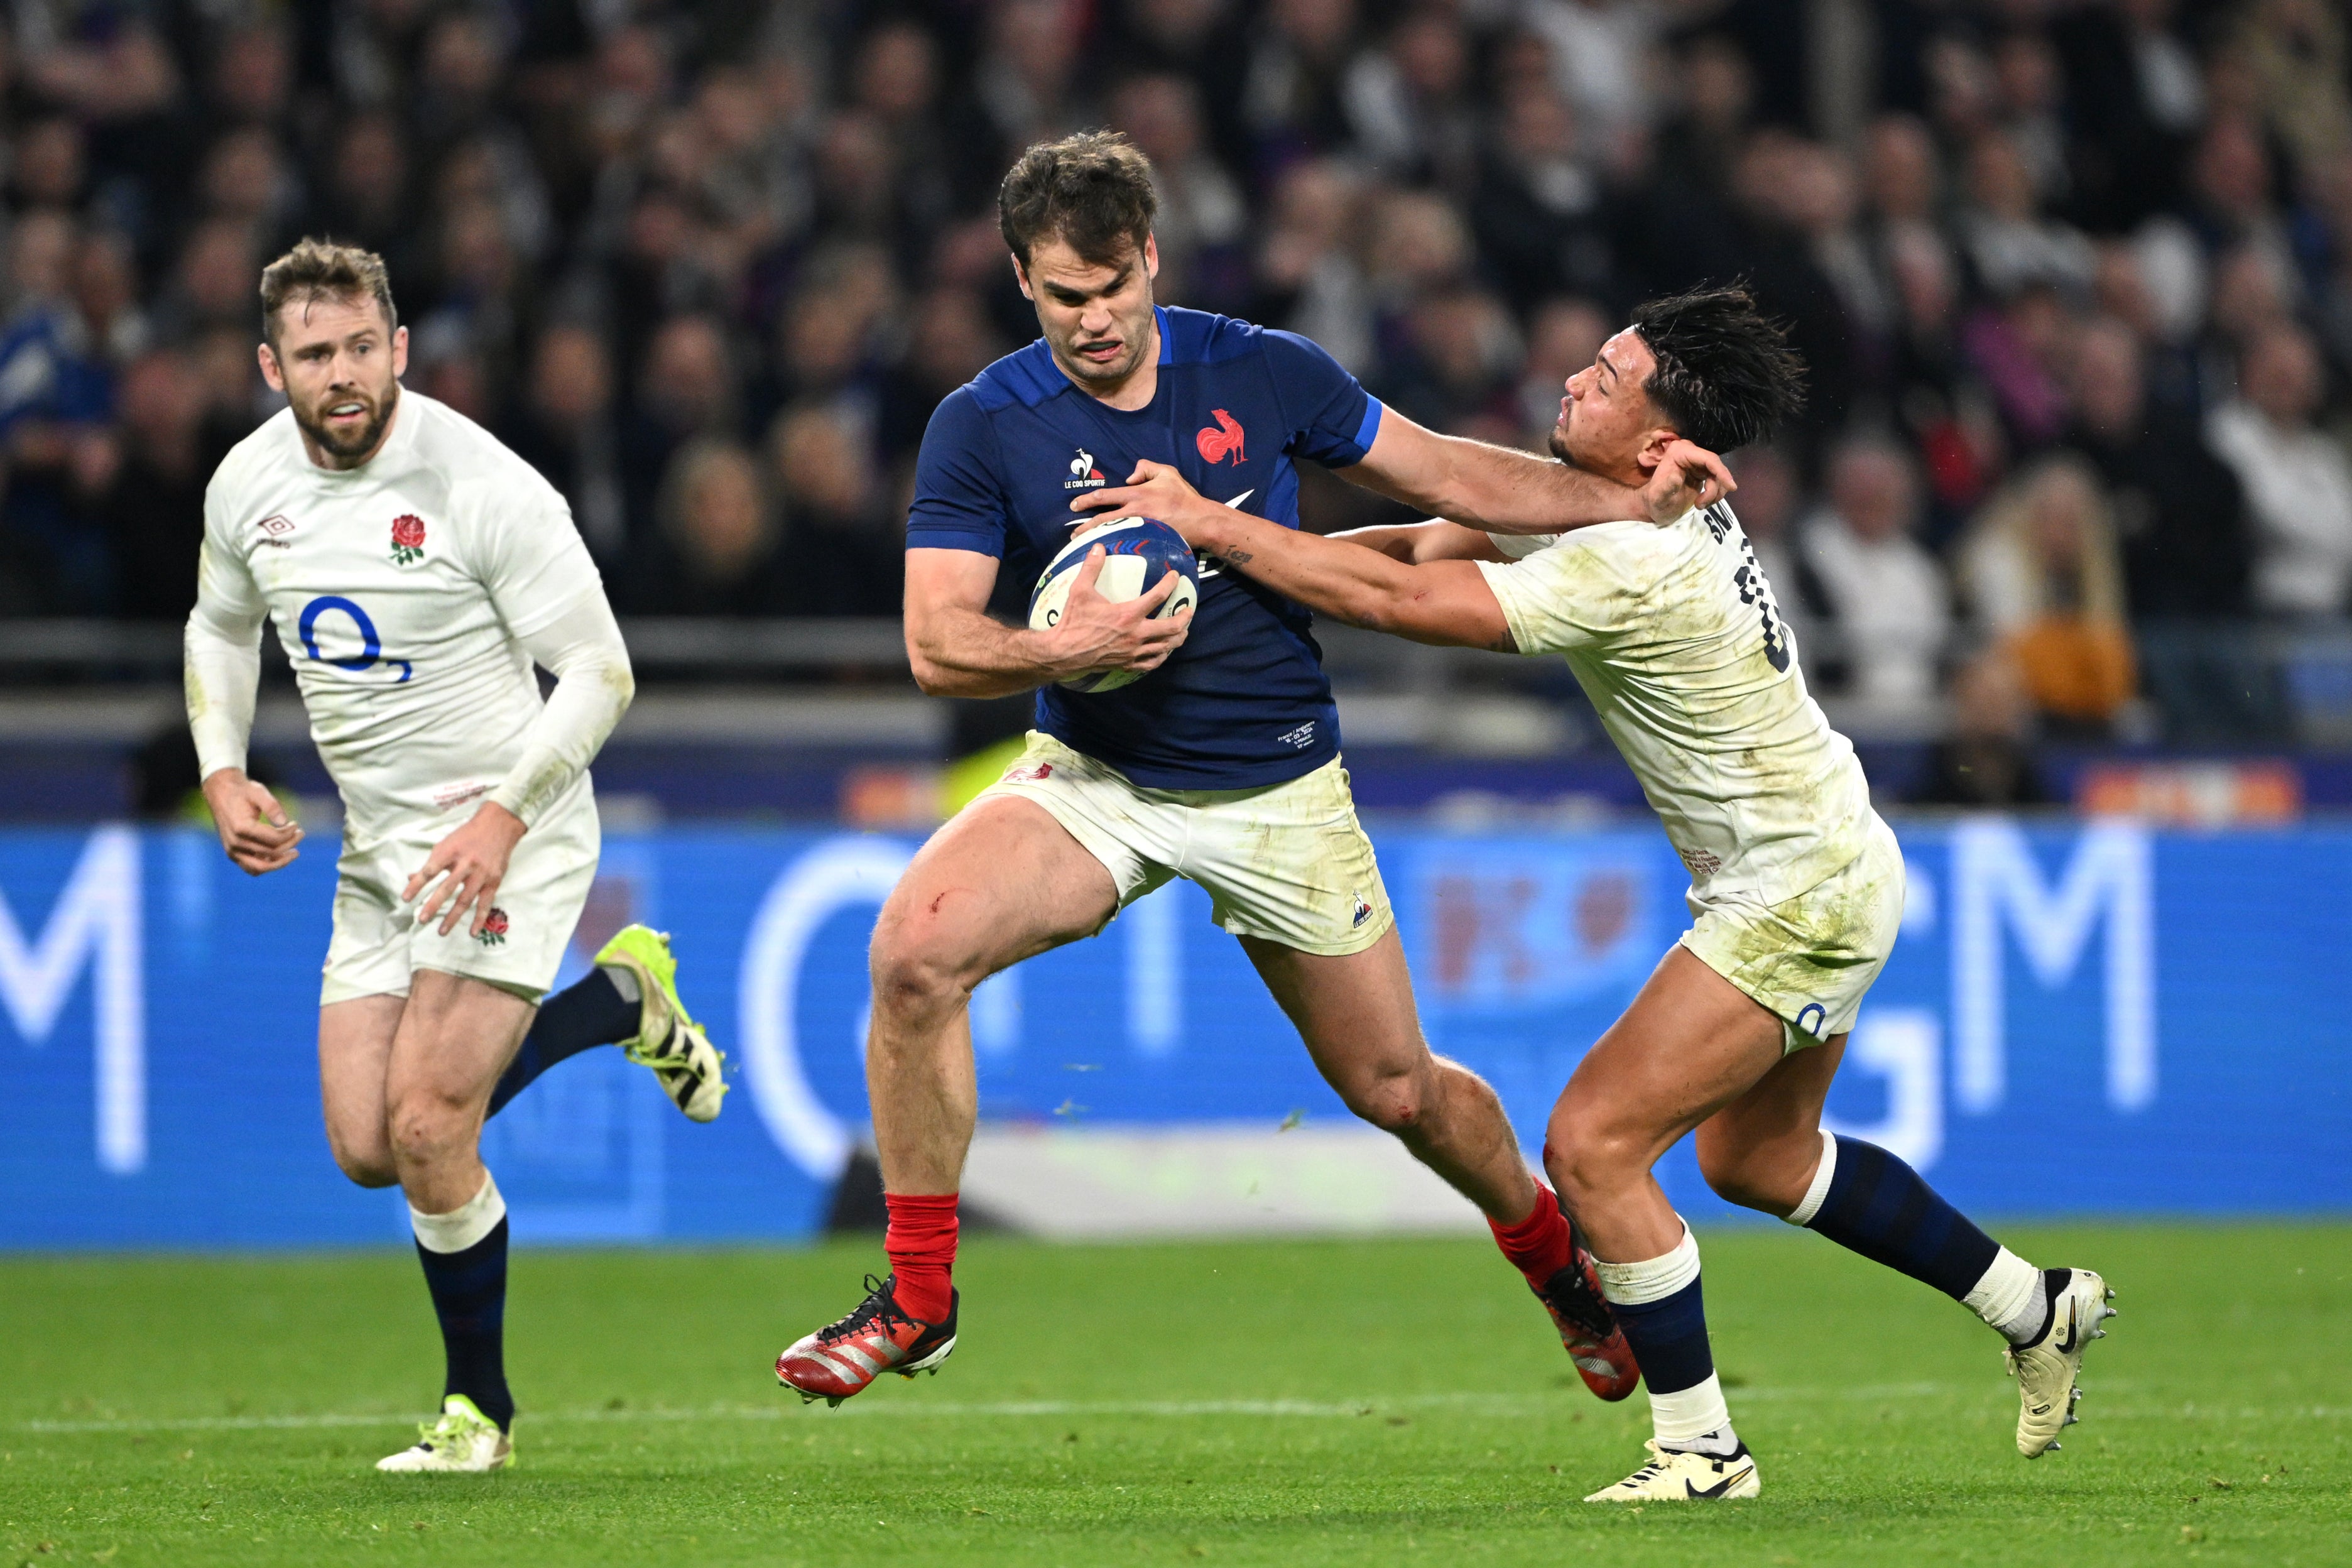 The broadcast future of the Six Nations is uncertain